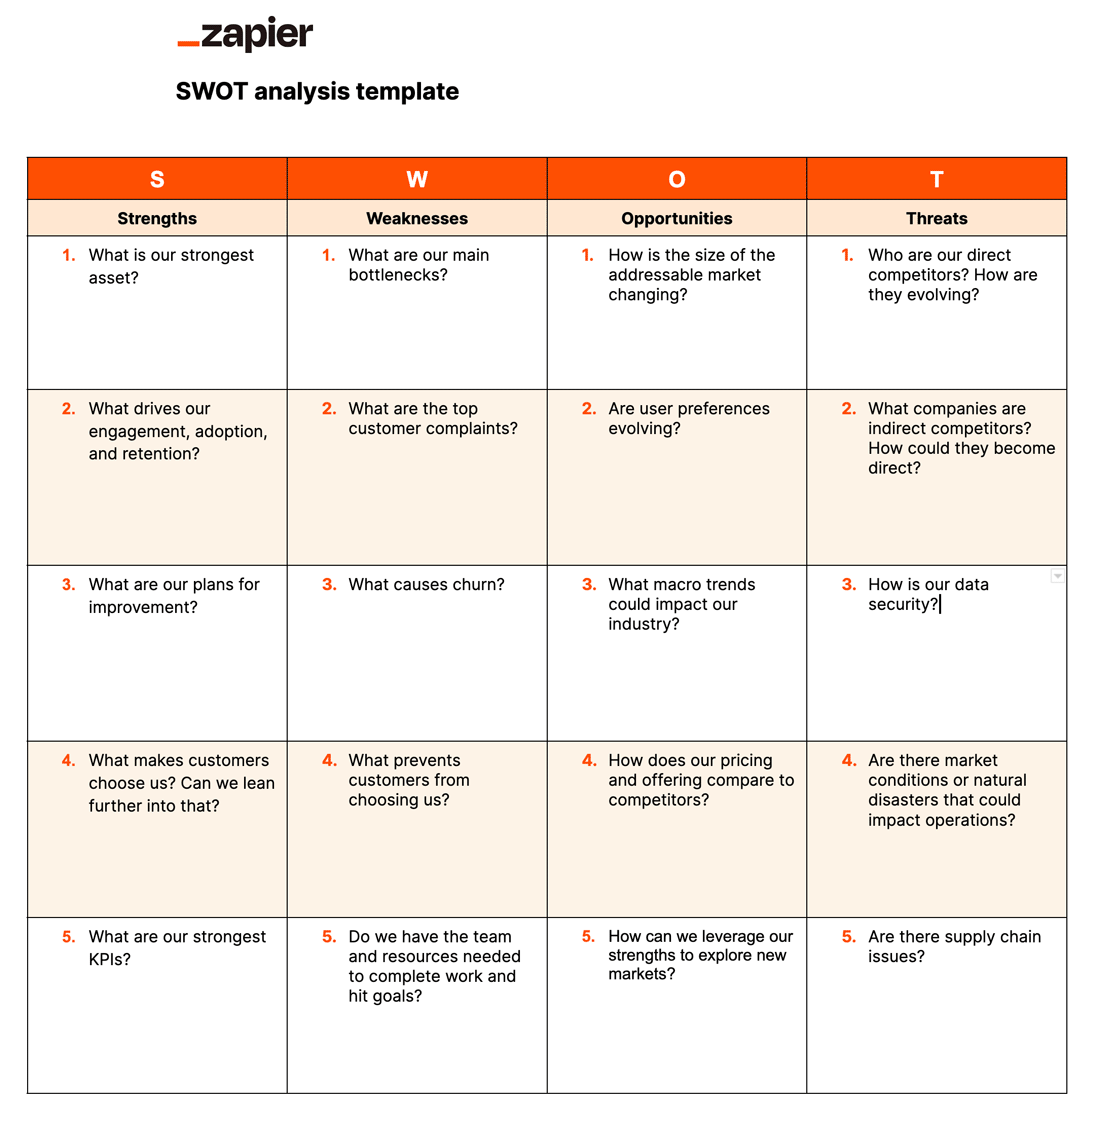 A SWOT analysis template with columns for strengths, weaknesses, opportunities, and threats that contains five example questions to help identify those strengths, weaknesses, opportunities, and threats 